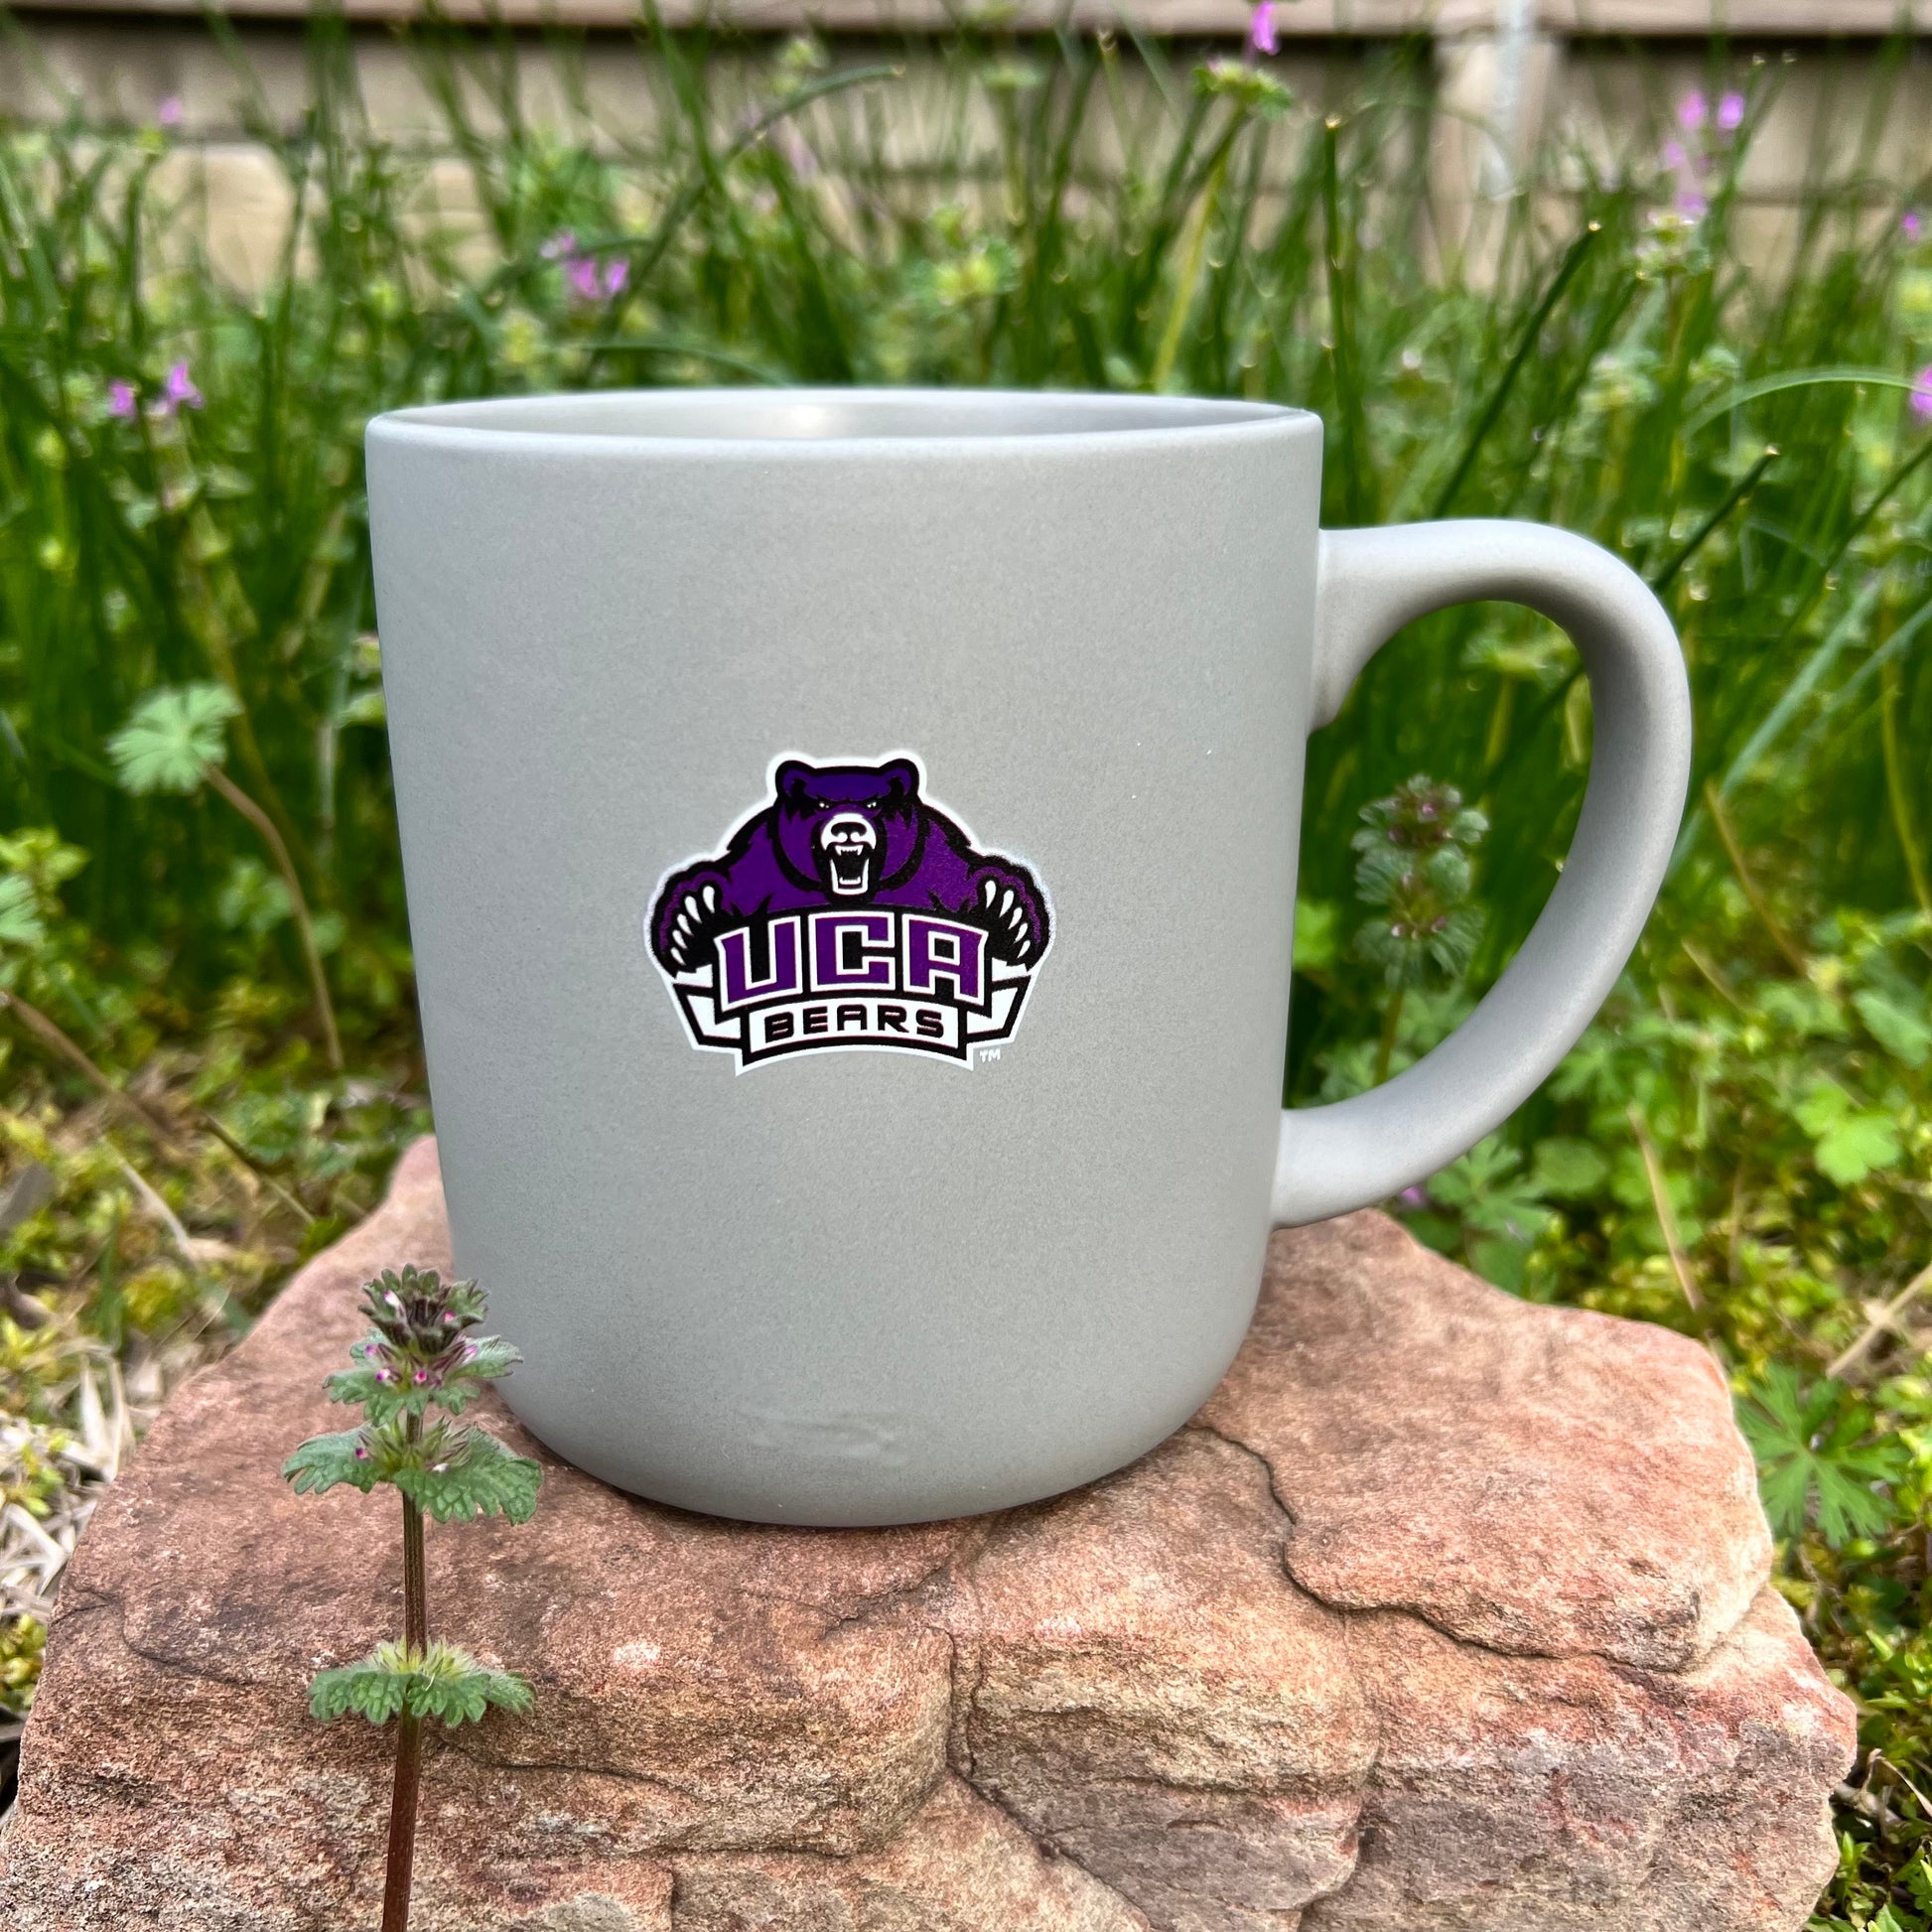 grey mug with purple uca bears logo on it set on a rock with greenery in the background.